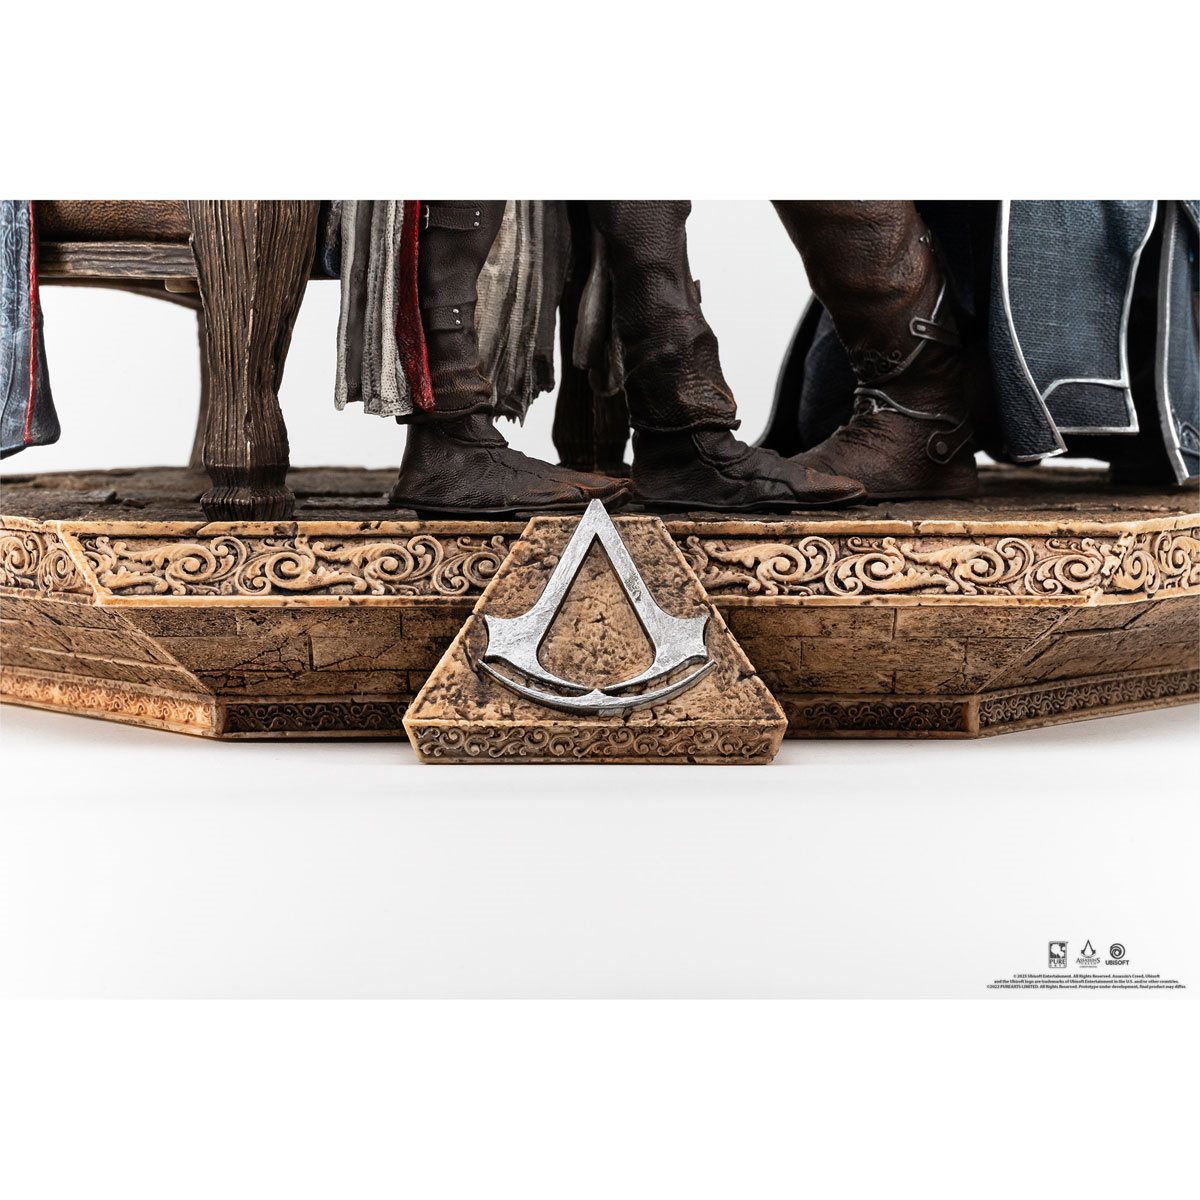 Assassin's Creed RIP Altair 1/6 Scale Diorama Exclusive Edition Statue –  PureArts